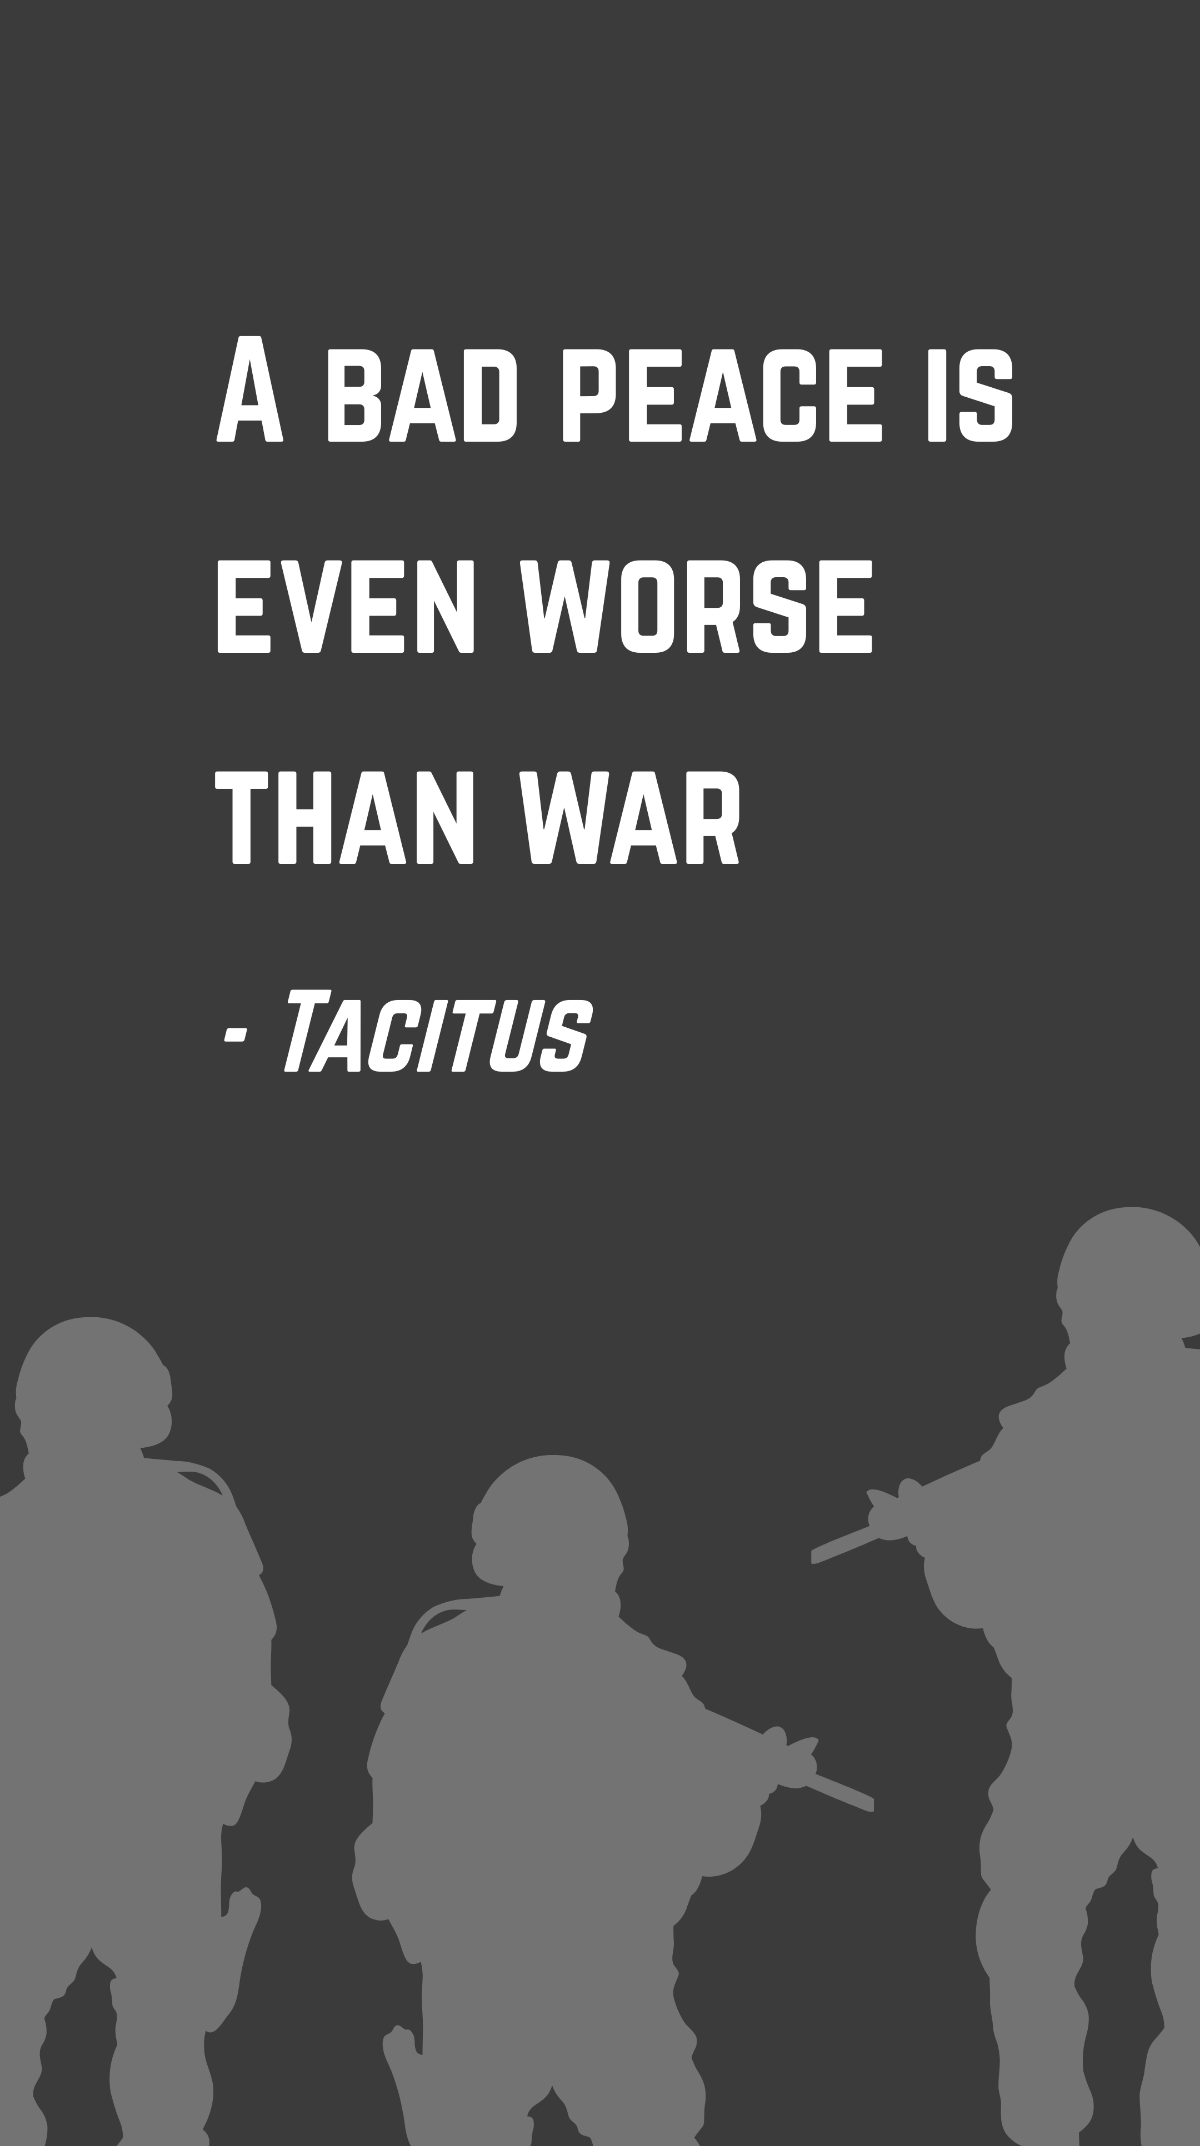 Tacitus - A bad peace is even worse than war Template